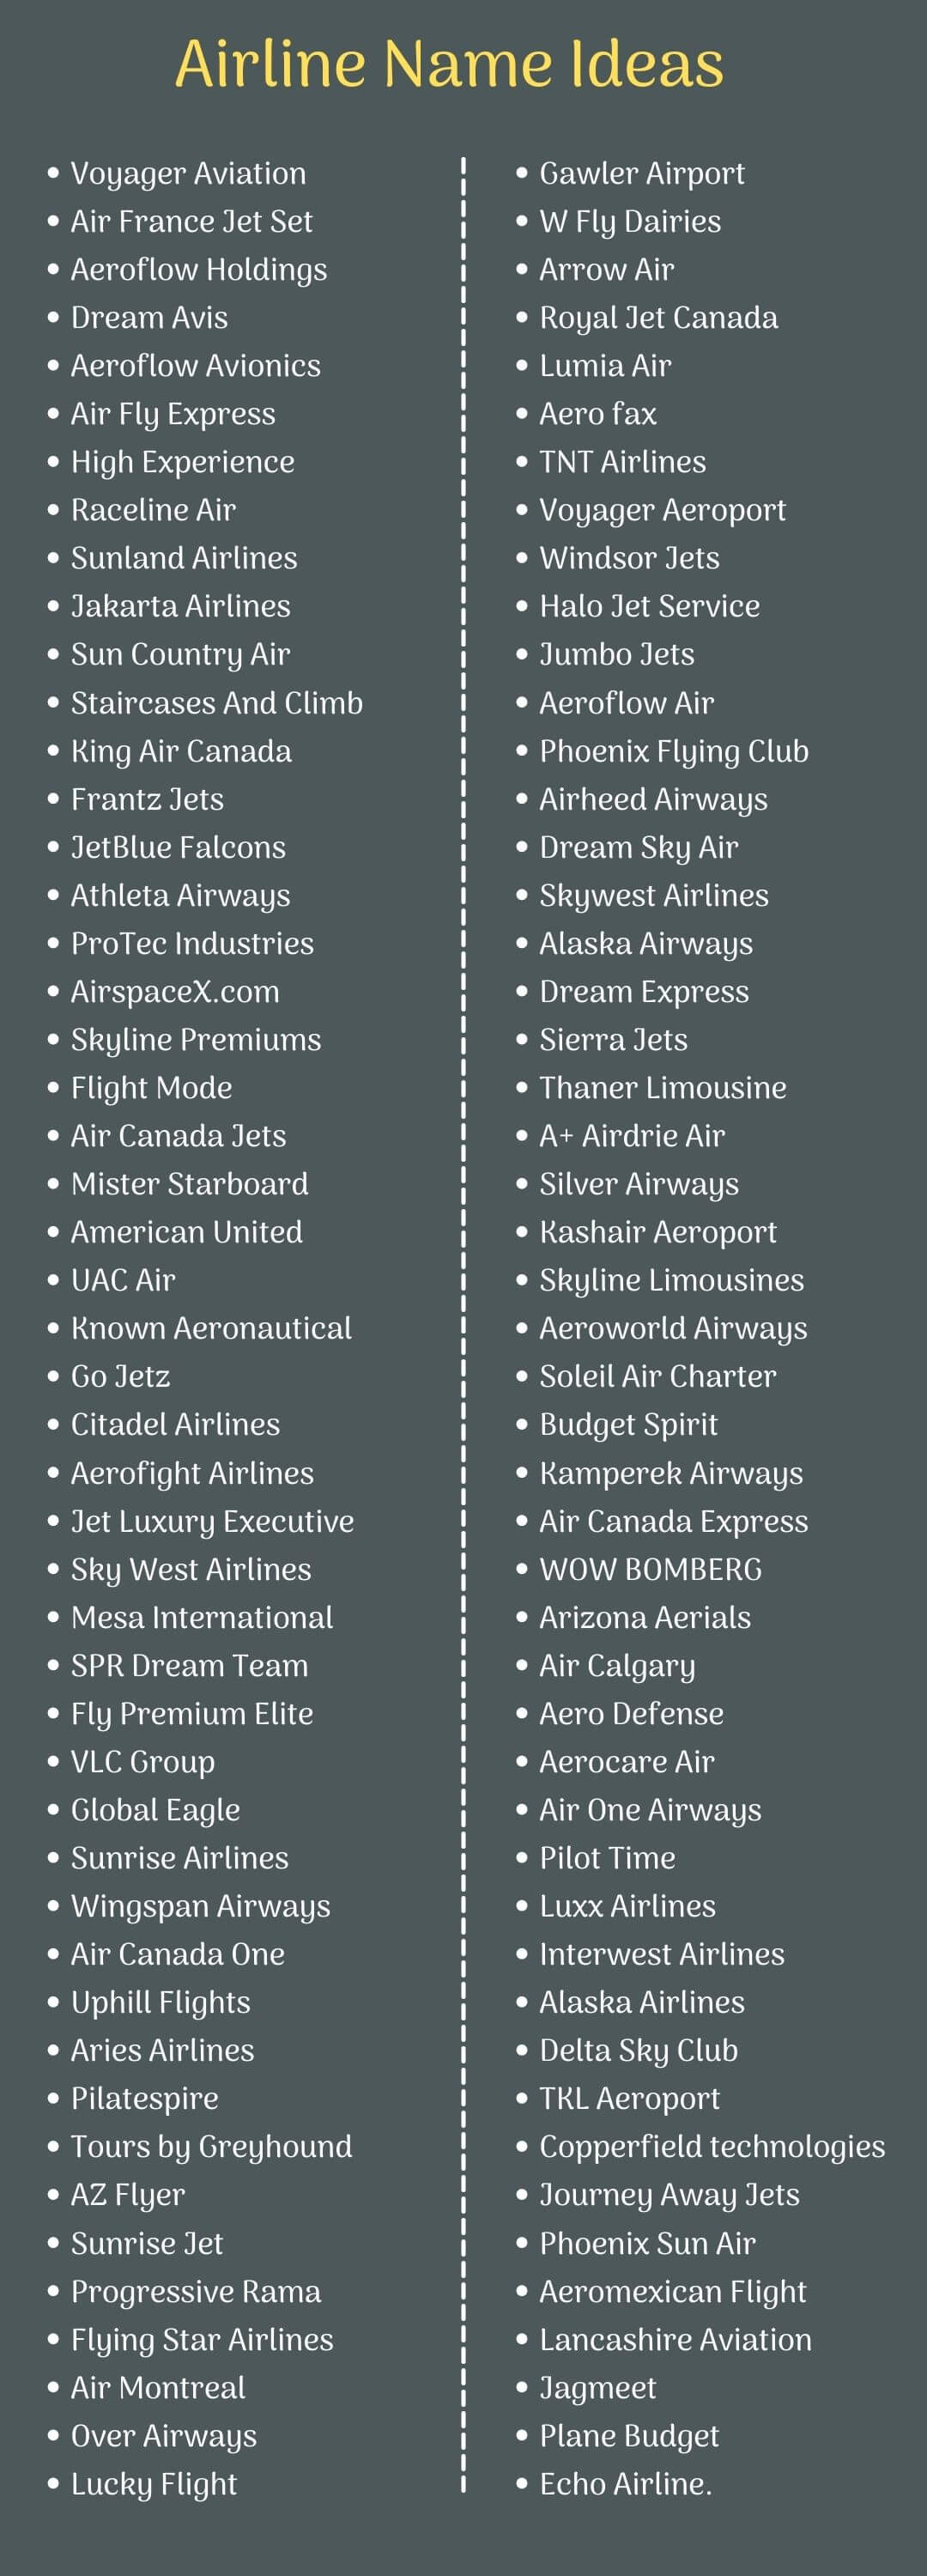 Airline Name Ideas: Infographic